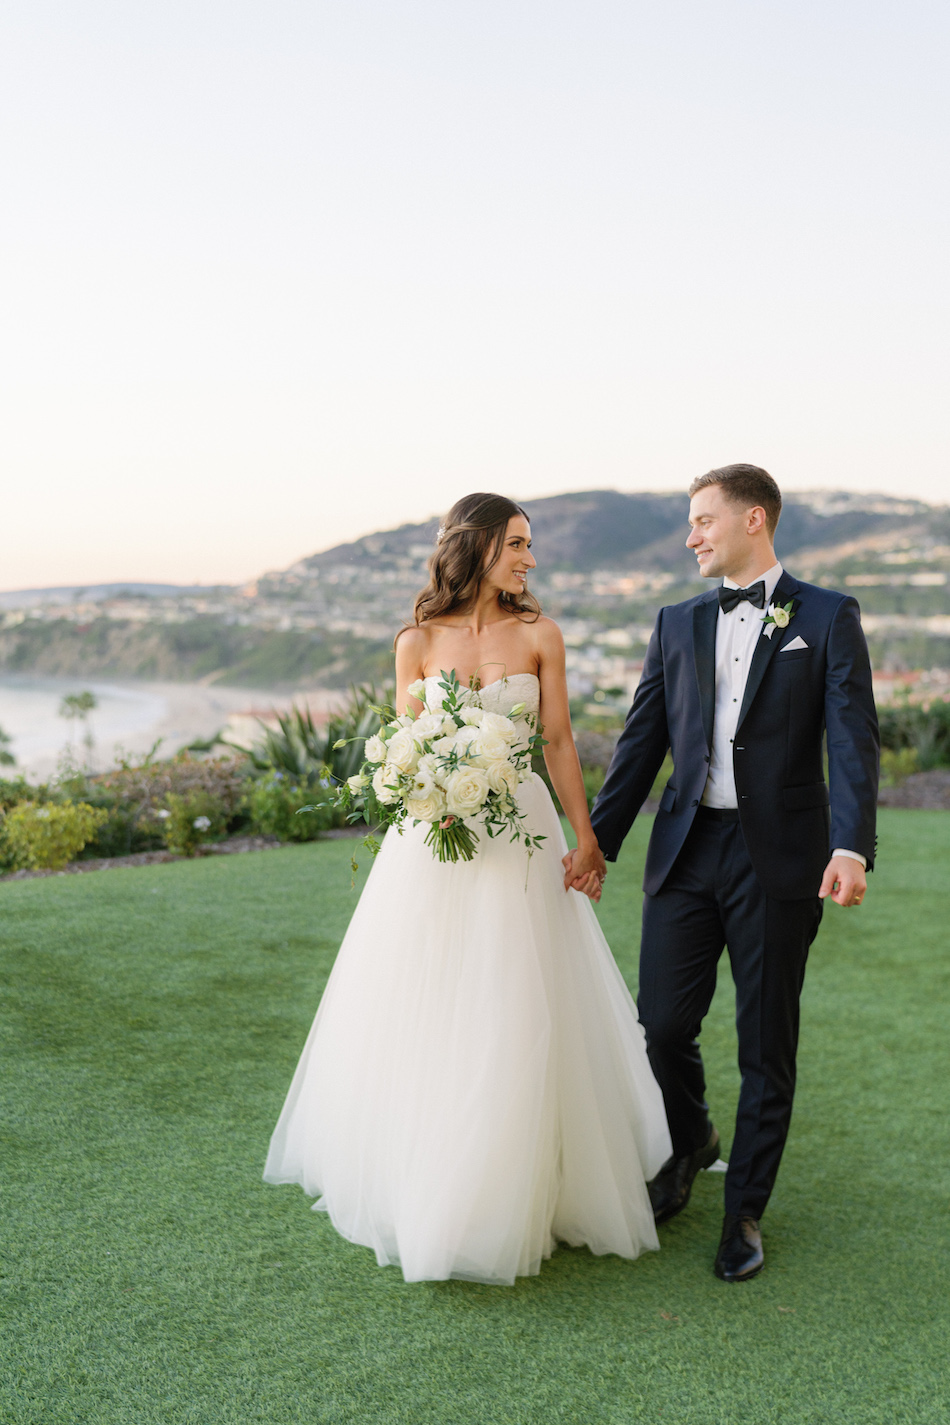 bride and groom, newlyweds, just married, floral design, florist, wedding florist, wedding flowers, orange county weddings, orange county wedding florist, orange county florist, orange county floral design, flowers by cina